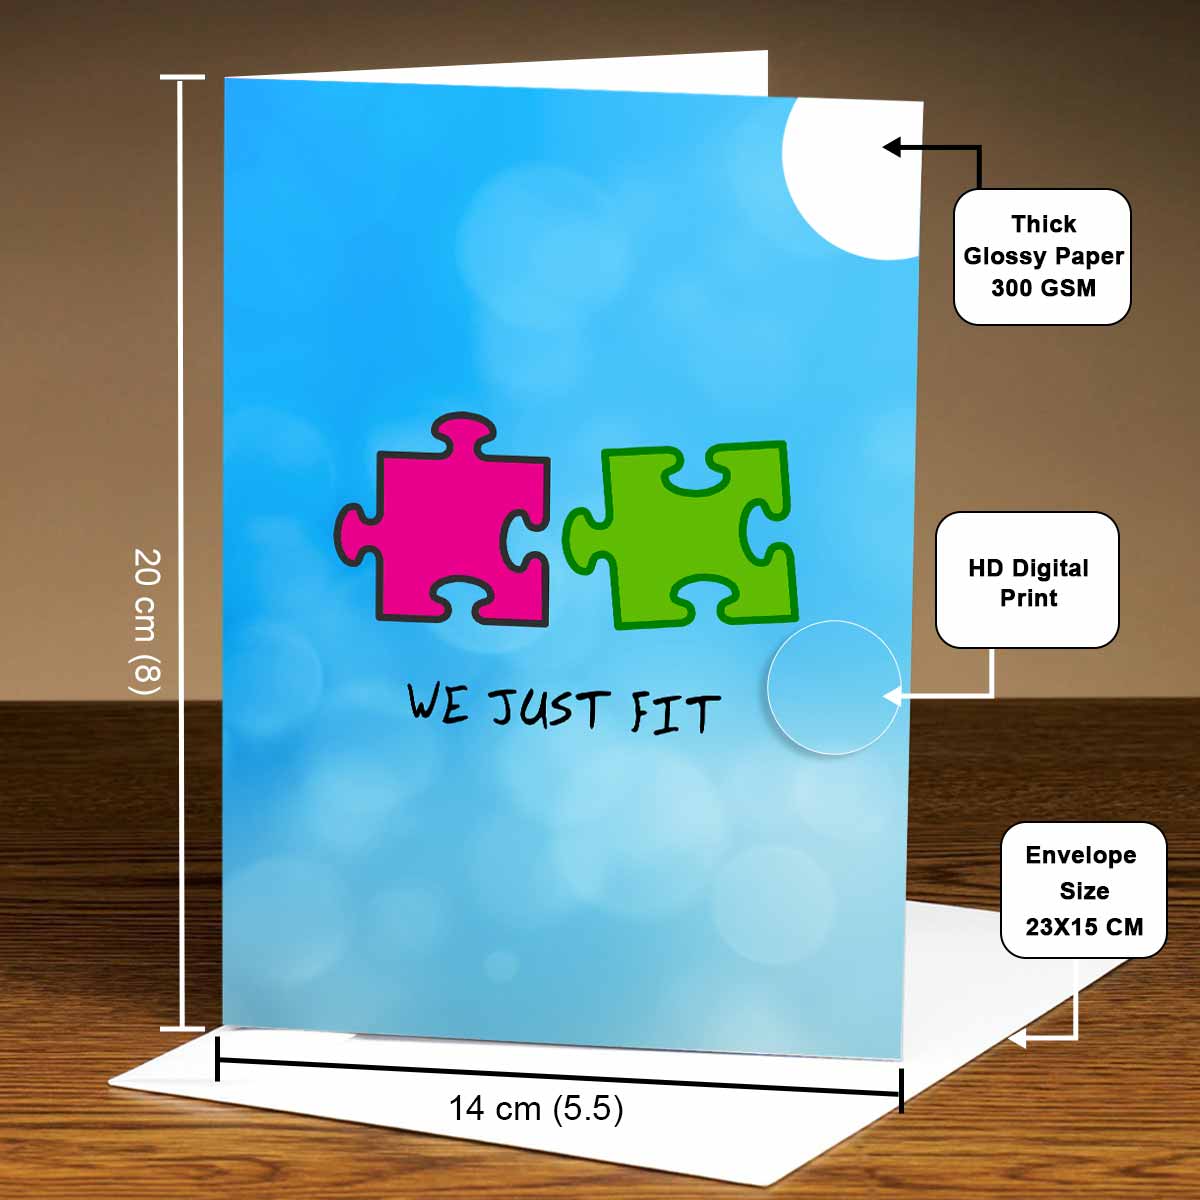 Personalised Puzzle I Love You Card